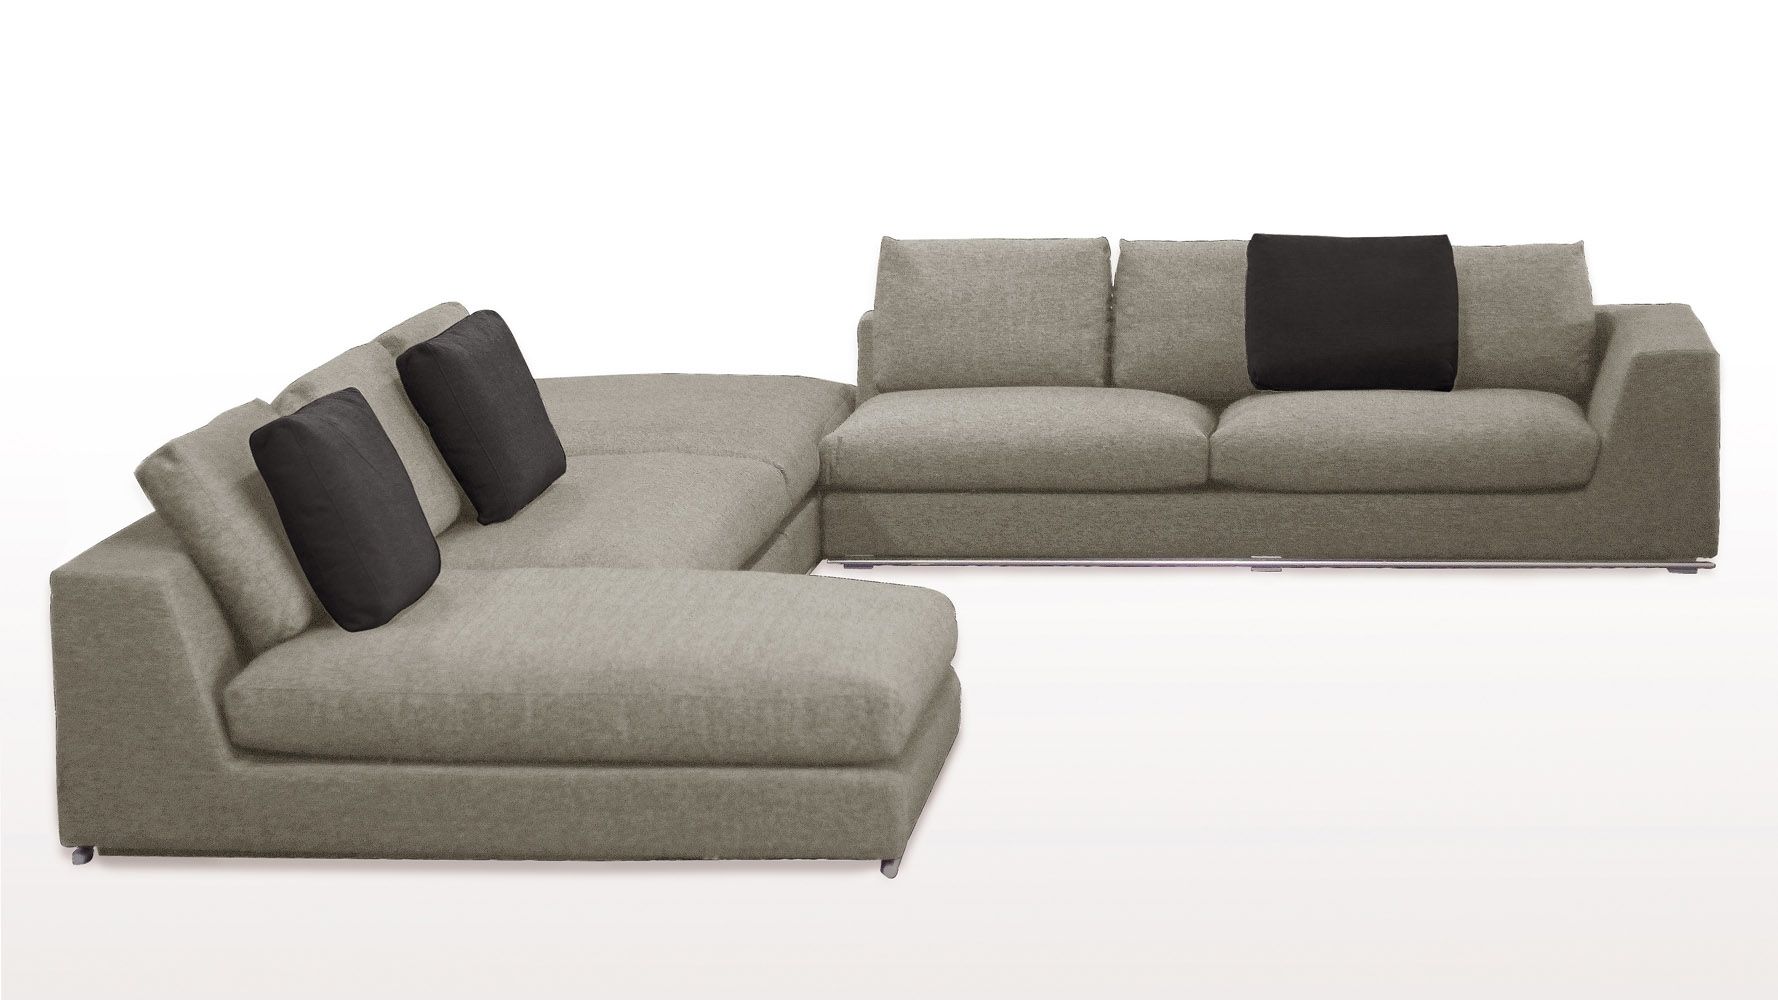 Trend Low Sectional Sofa 37 Living Room Sofa Ideas With Low In Low Sofas (View 3 of 10)